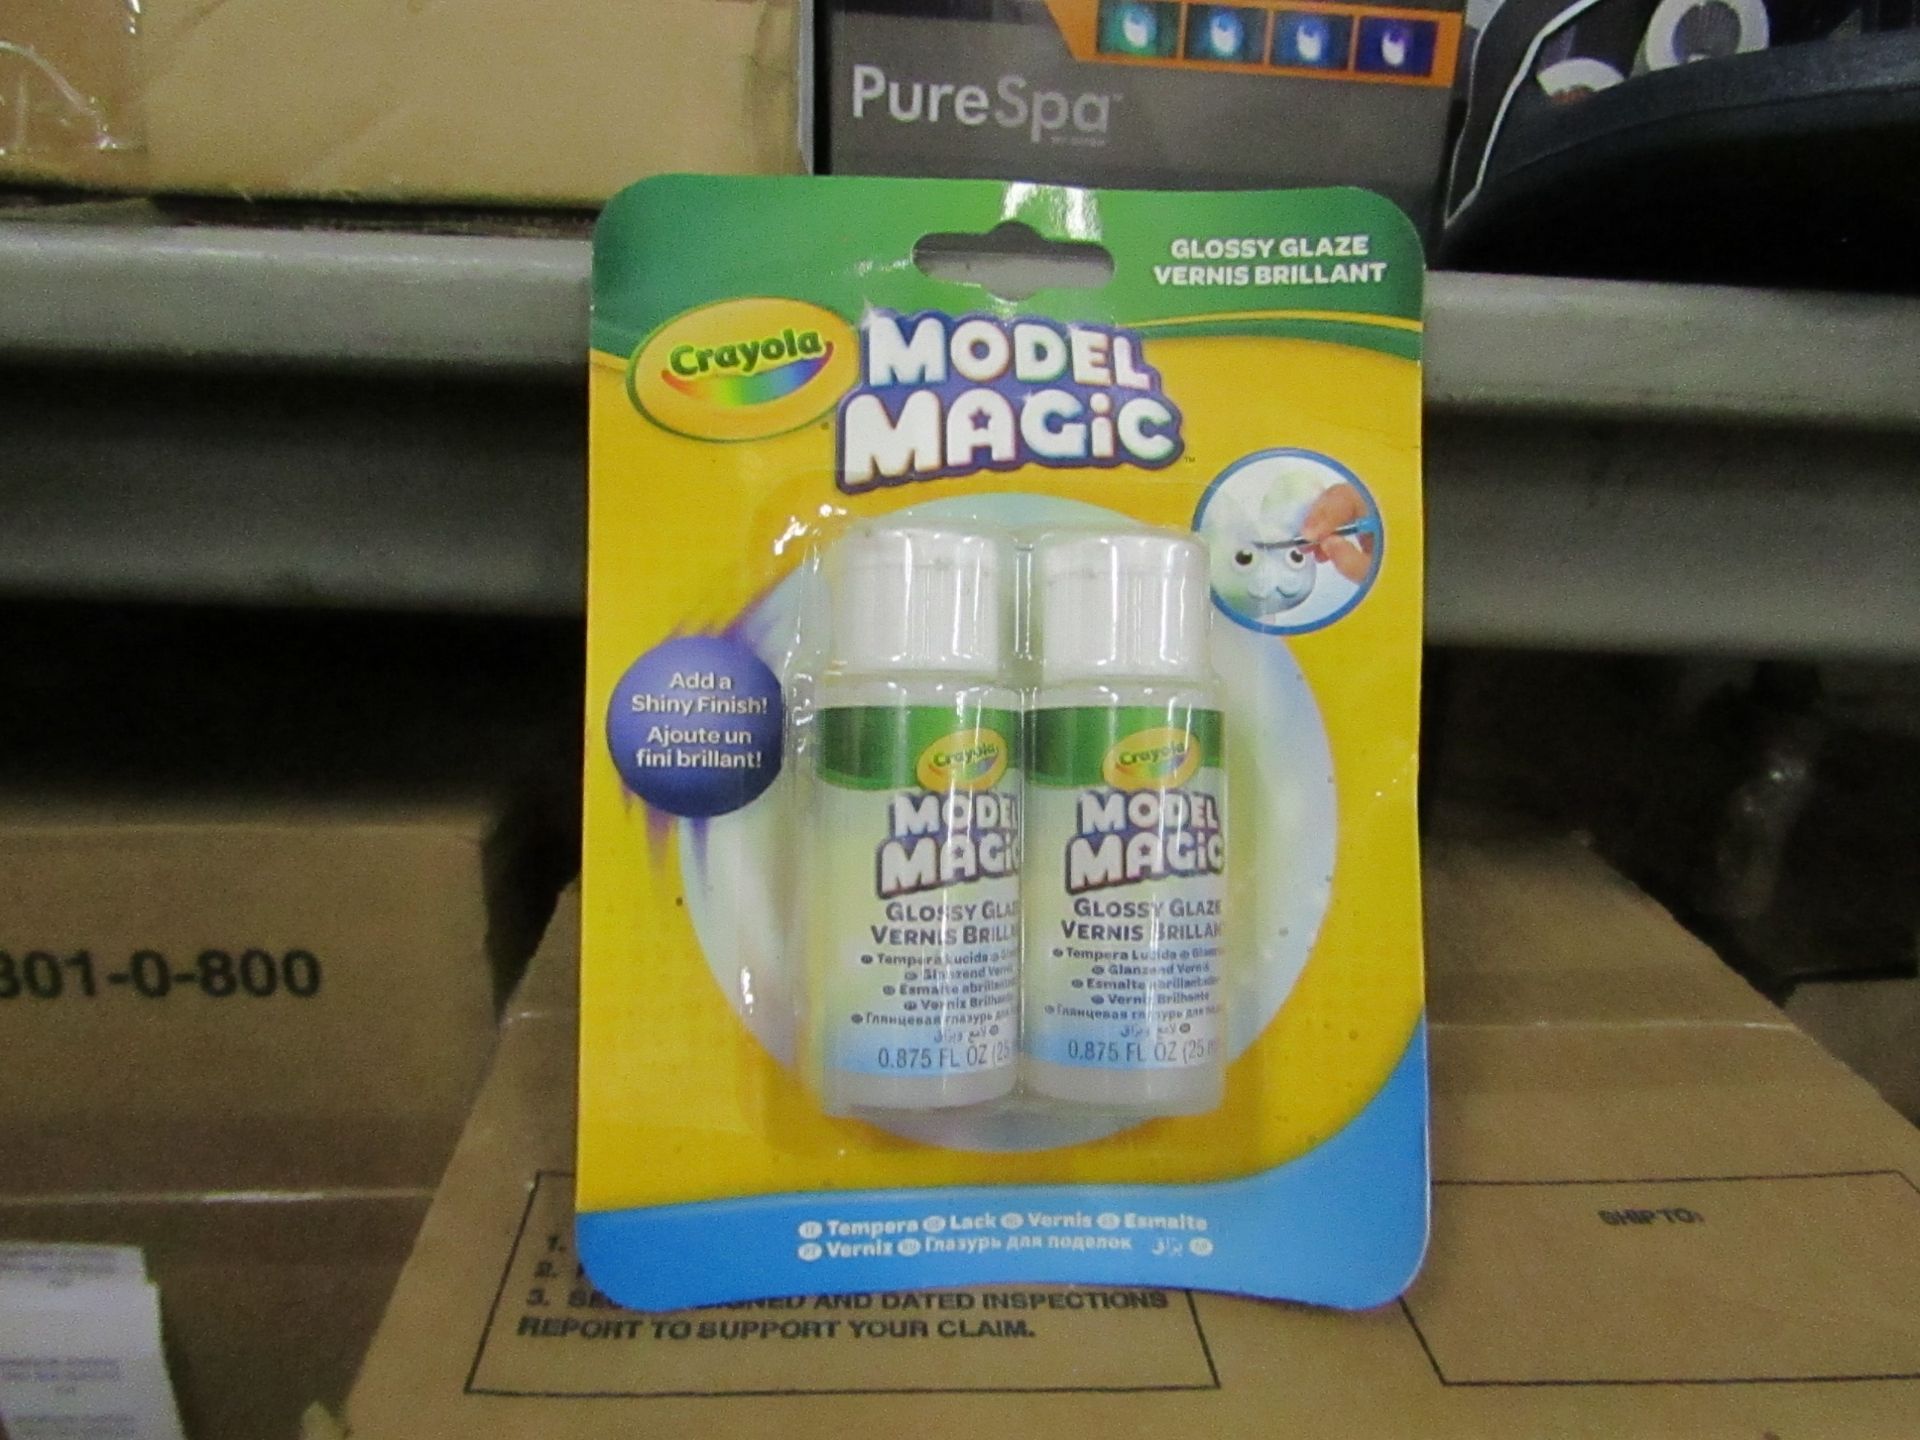 3x Boxes Containing 16 Per Box Crayola Model Magic, 2Per Pack, Unchecked & Packaged.